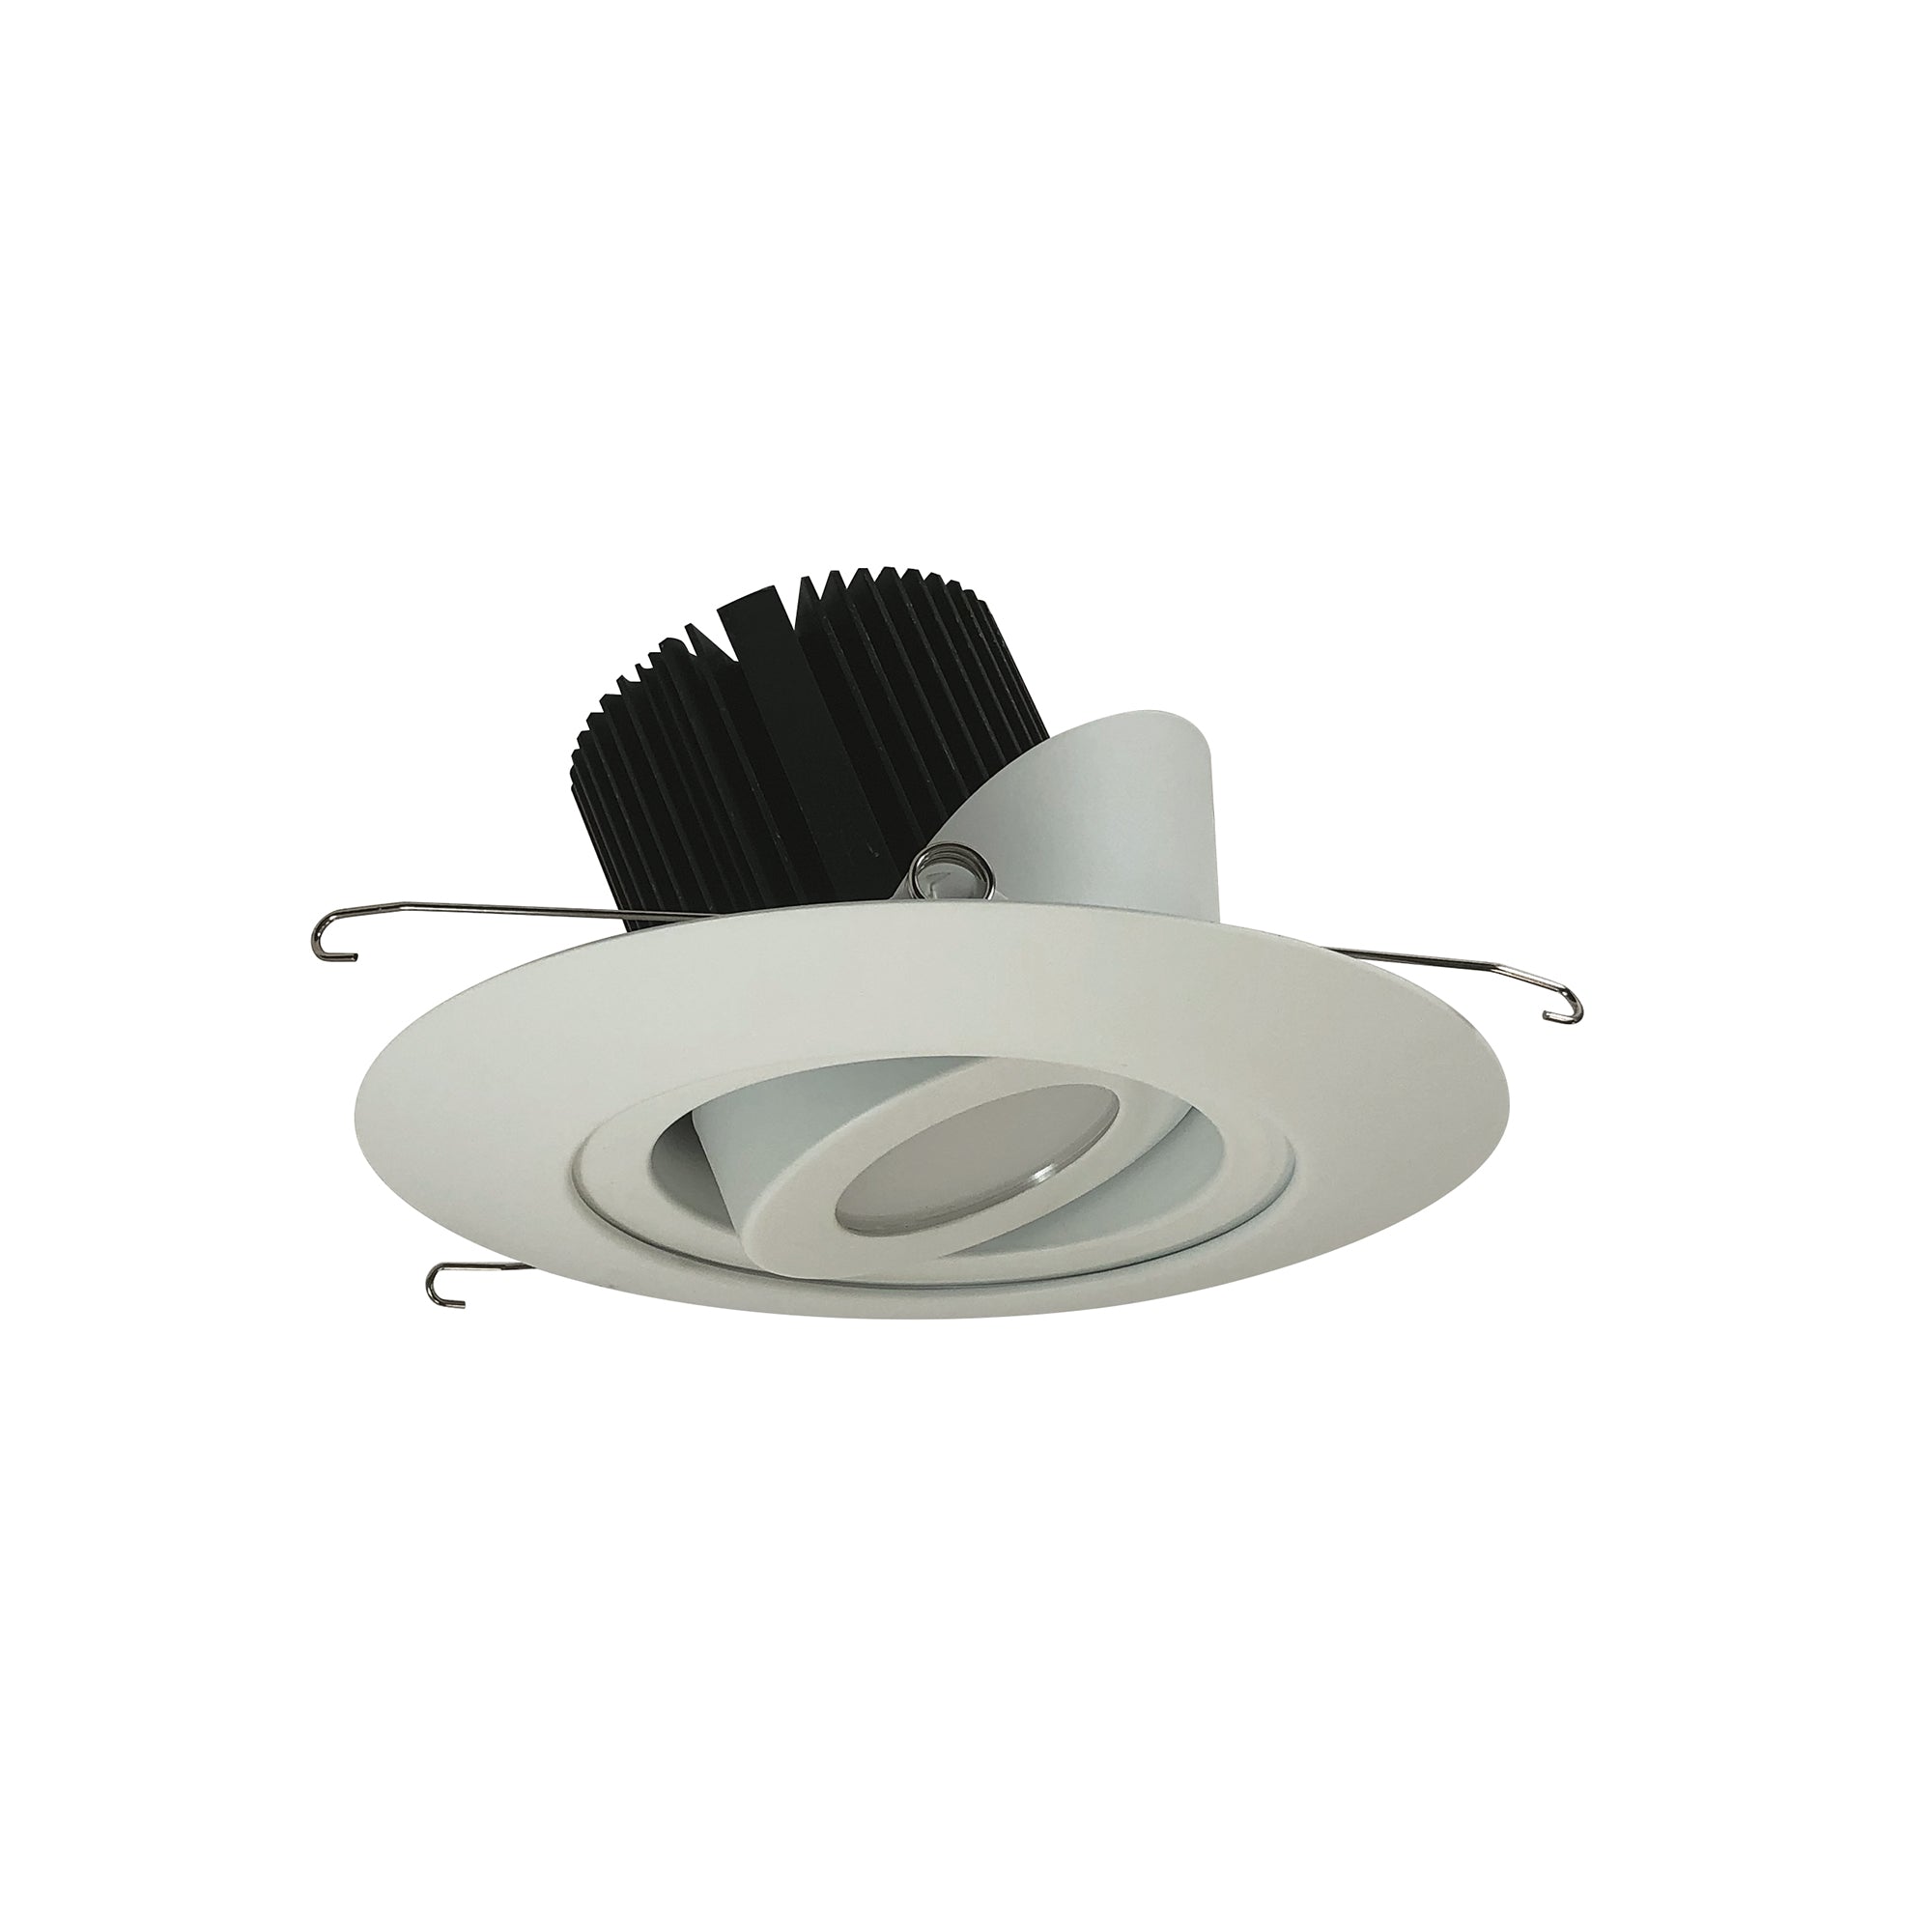 Nora Lighting NRM2-614L2535FWW - Recessed - 6 Inch Marquise II Round Surface Adjustable Trim, Flood, 2500lm, 3500K, White (Not Compatible with NHRM2-625 Housings)